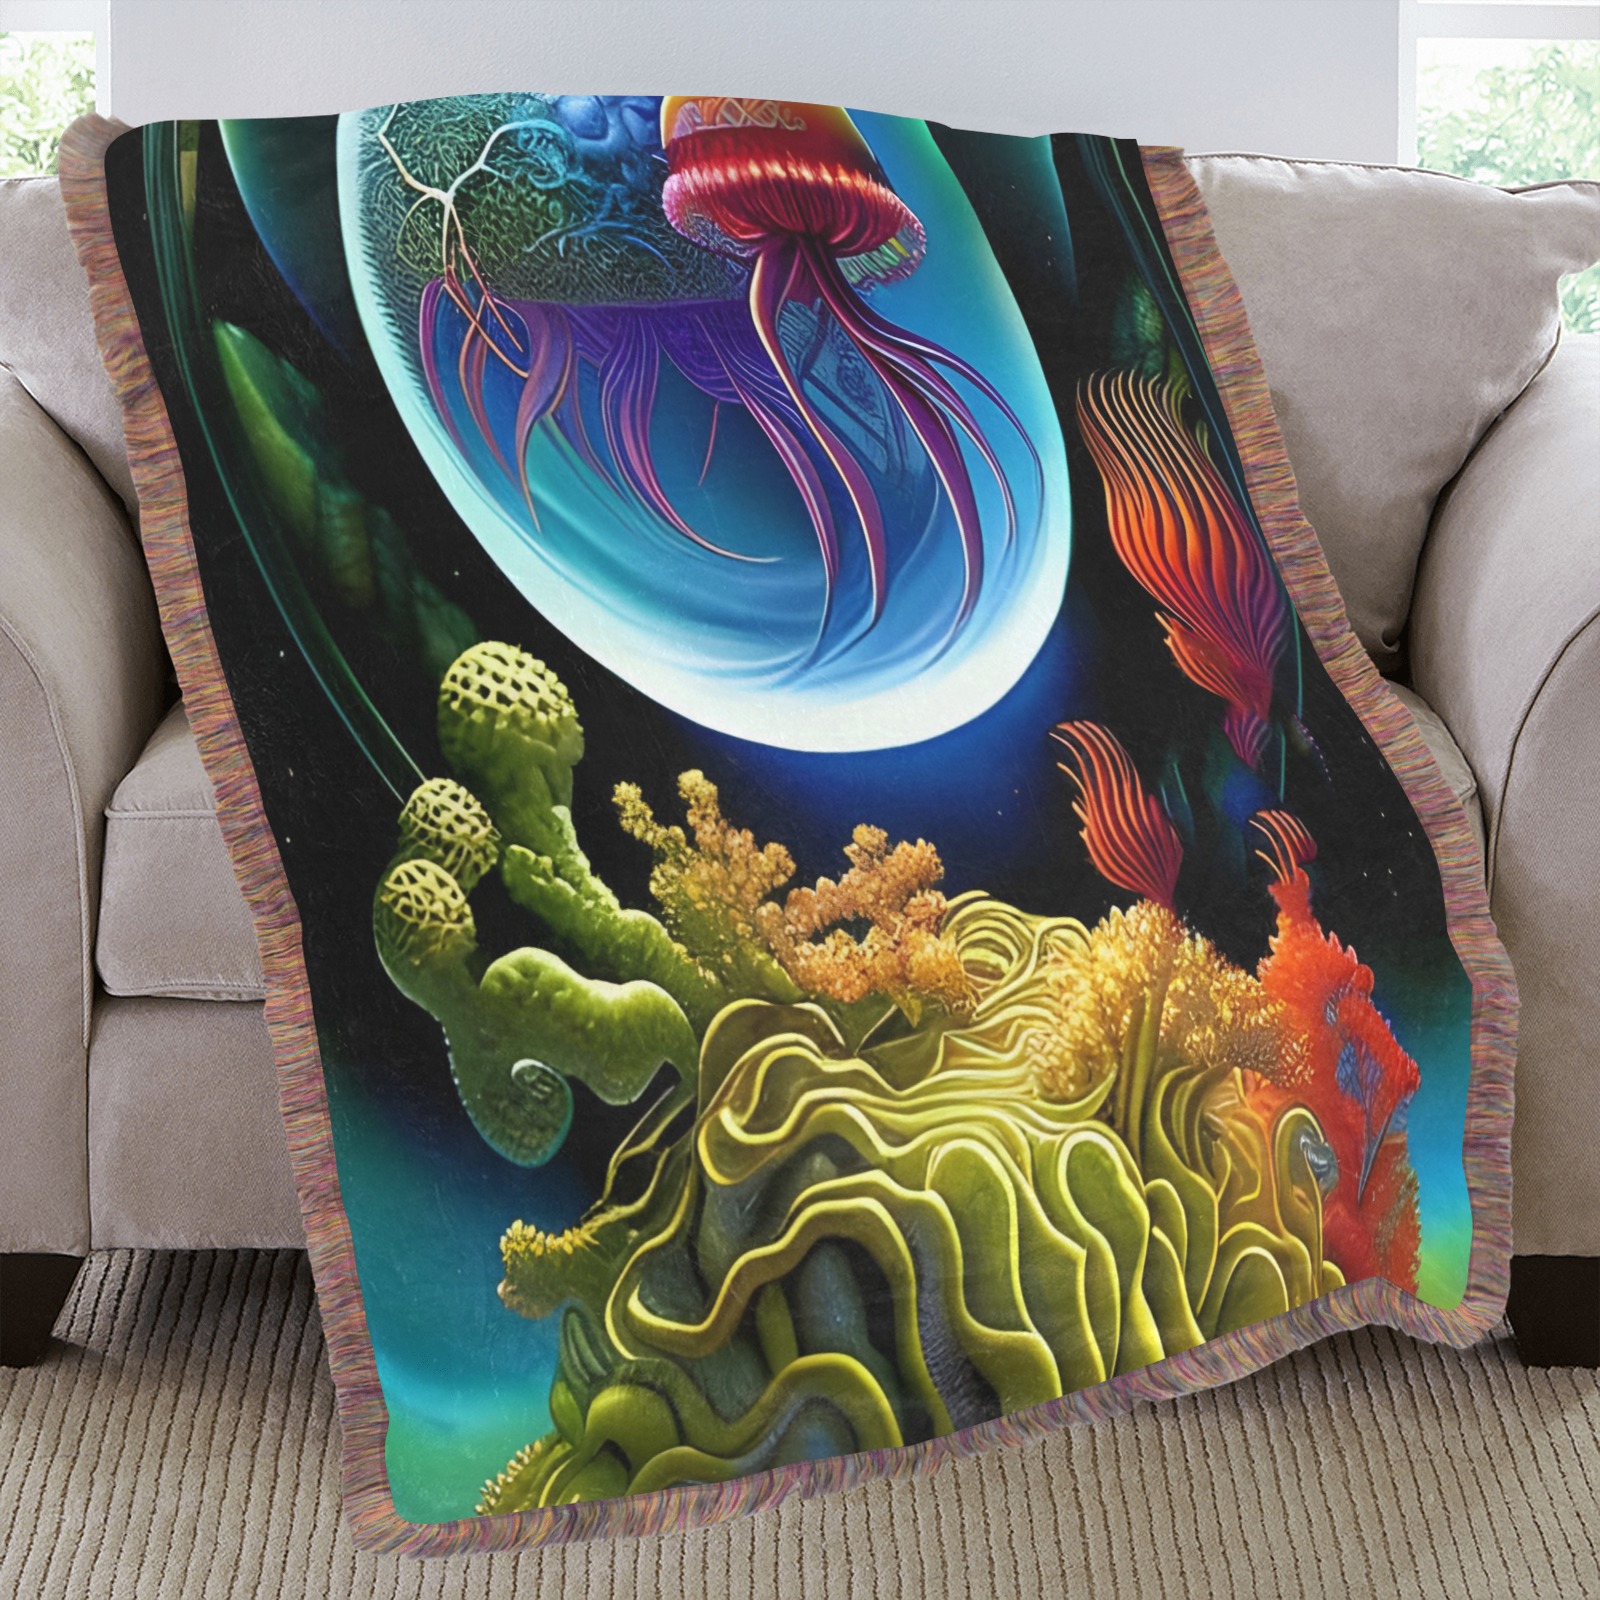 Out Of This World Spheres jellyfish Ultra-Soft Fringe Blanket 50"x60" (Mixed Green)